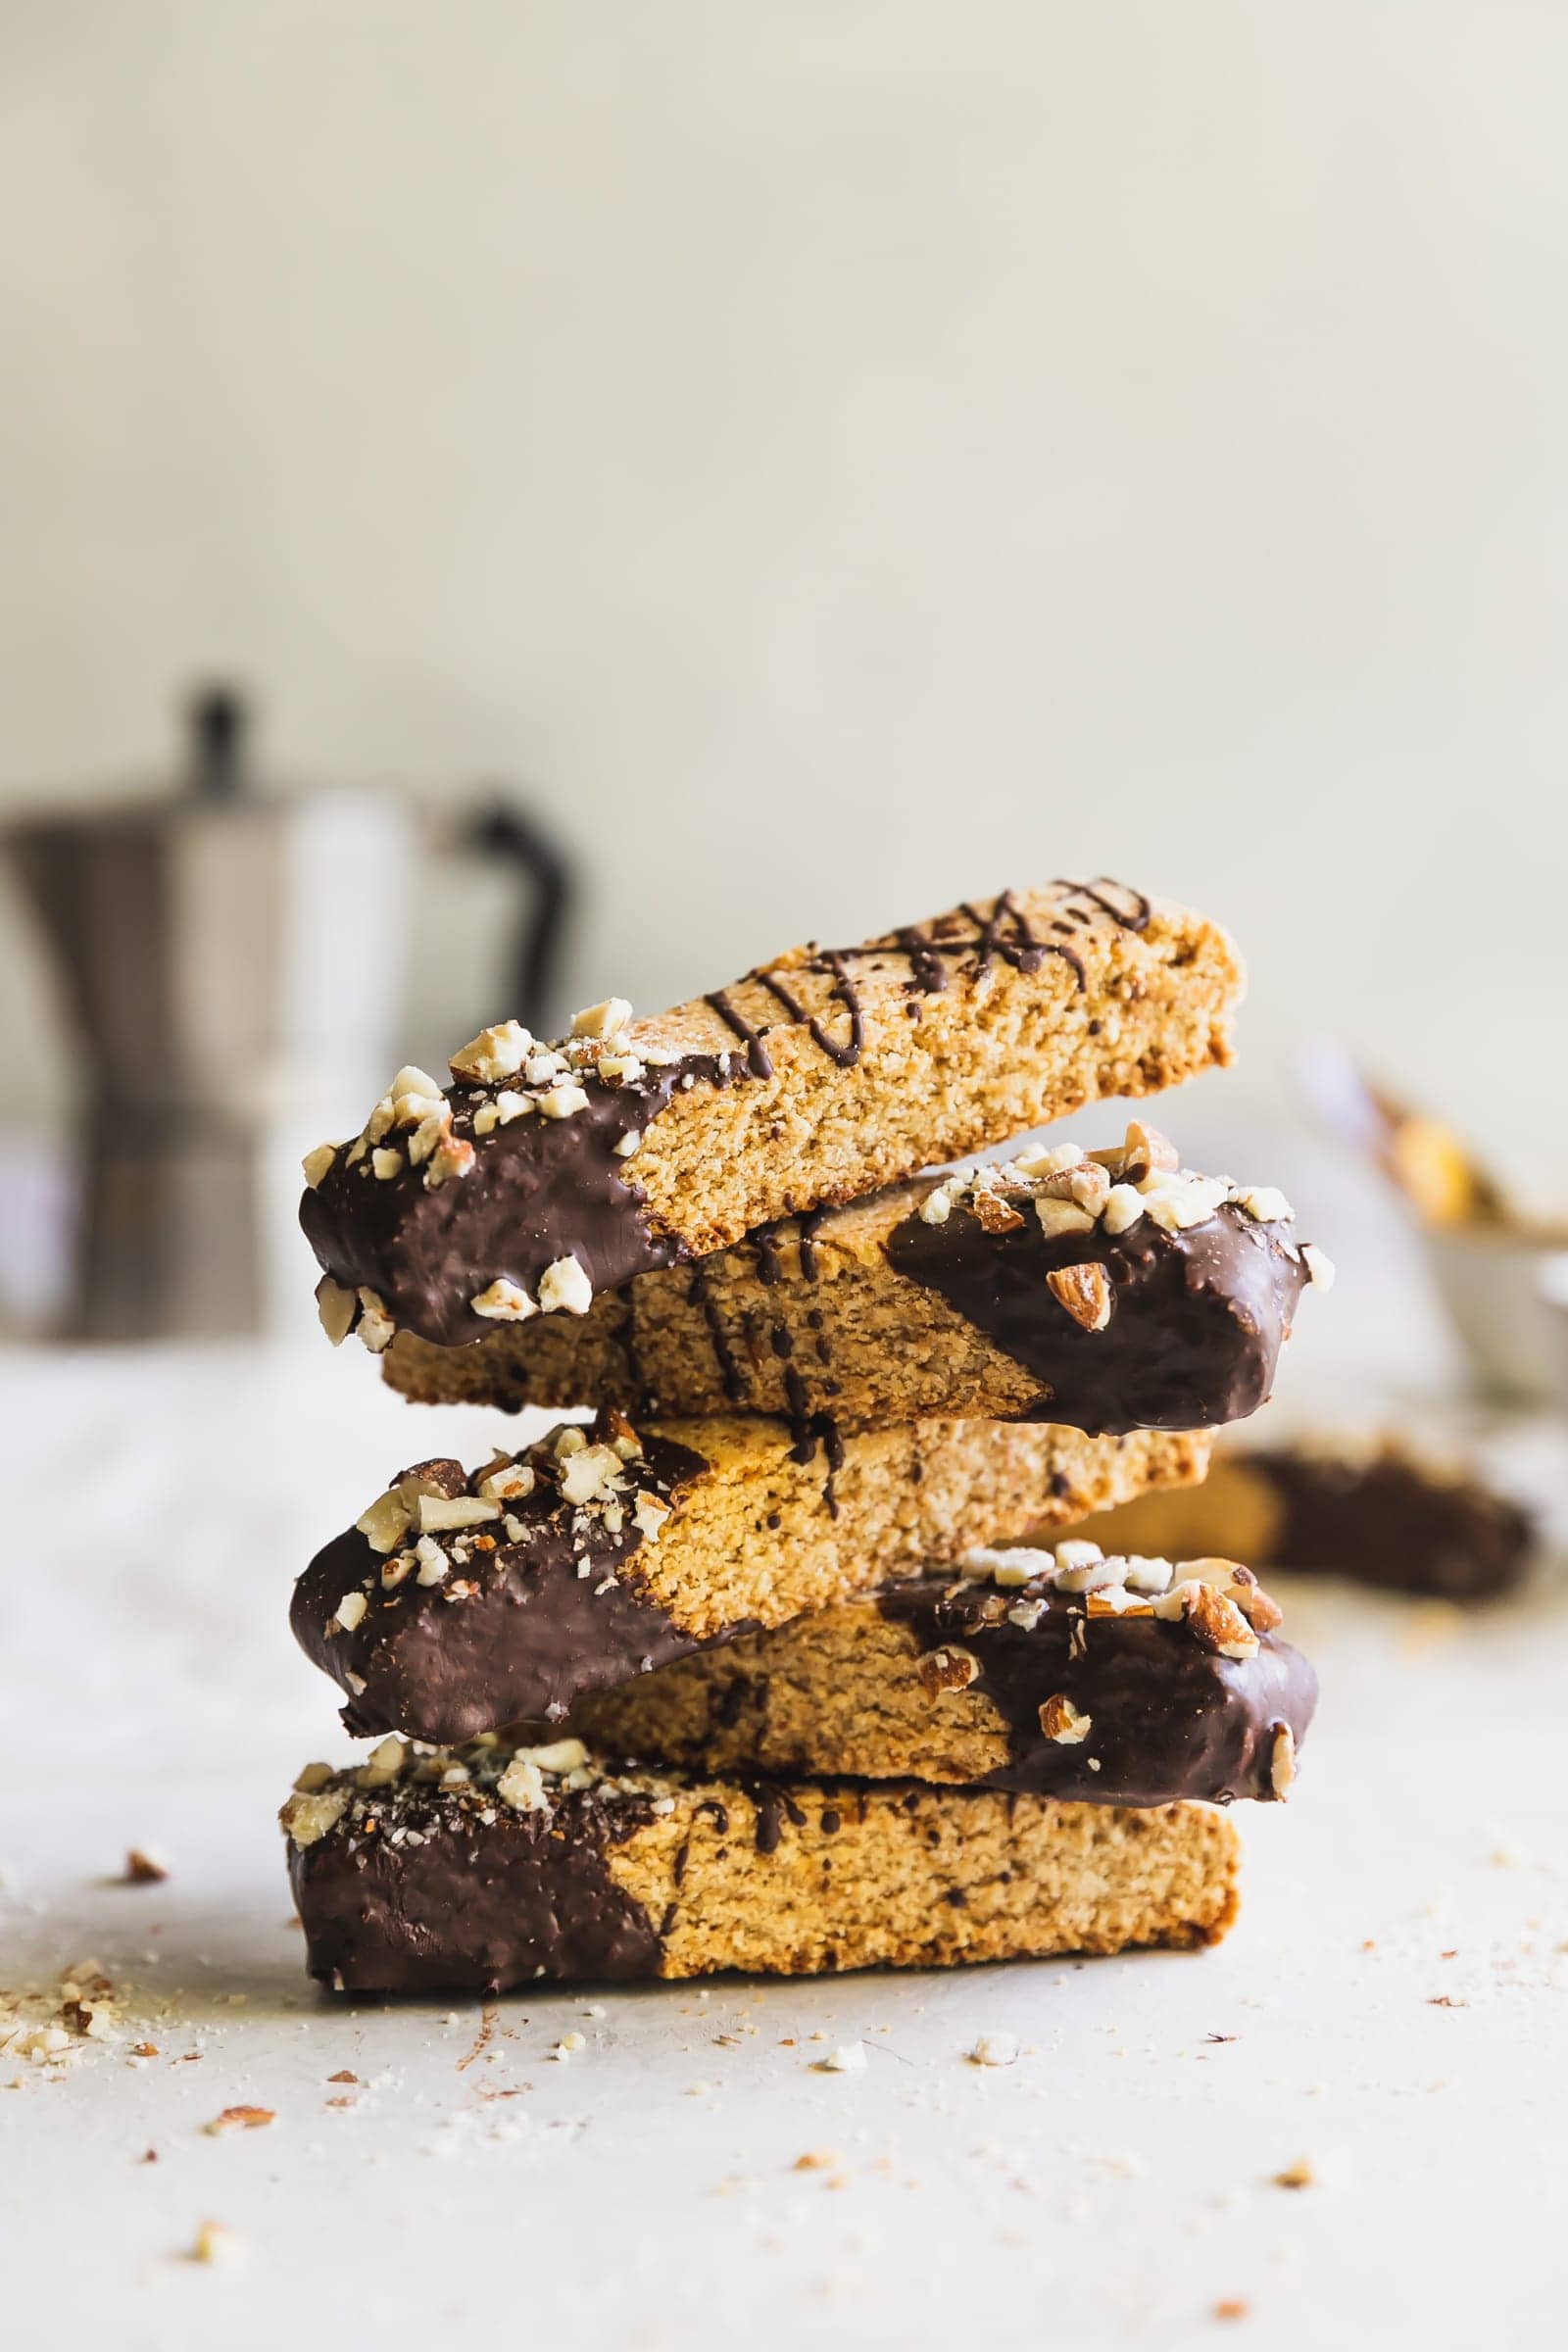 Dairy-free and grain-free almond biscotti dipped in melted dark chocolate and topped with chopped almonds. No better snack for any day of the week!